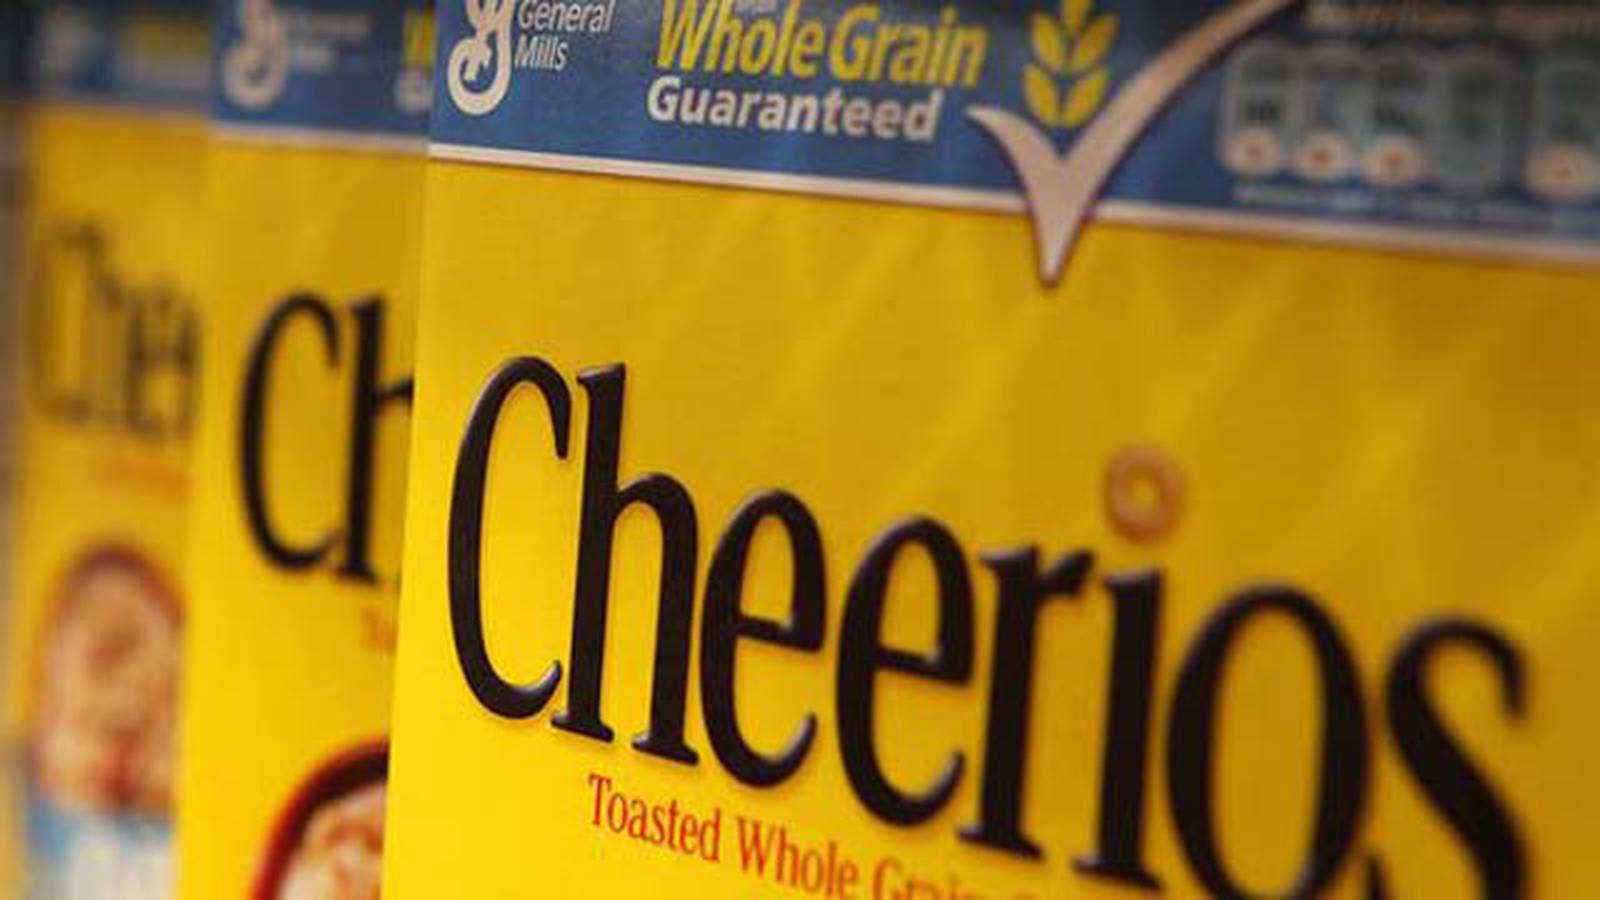 5 things to know about the Cheerios recall Boston 25 News